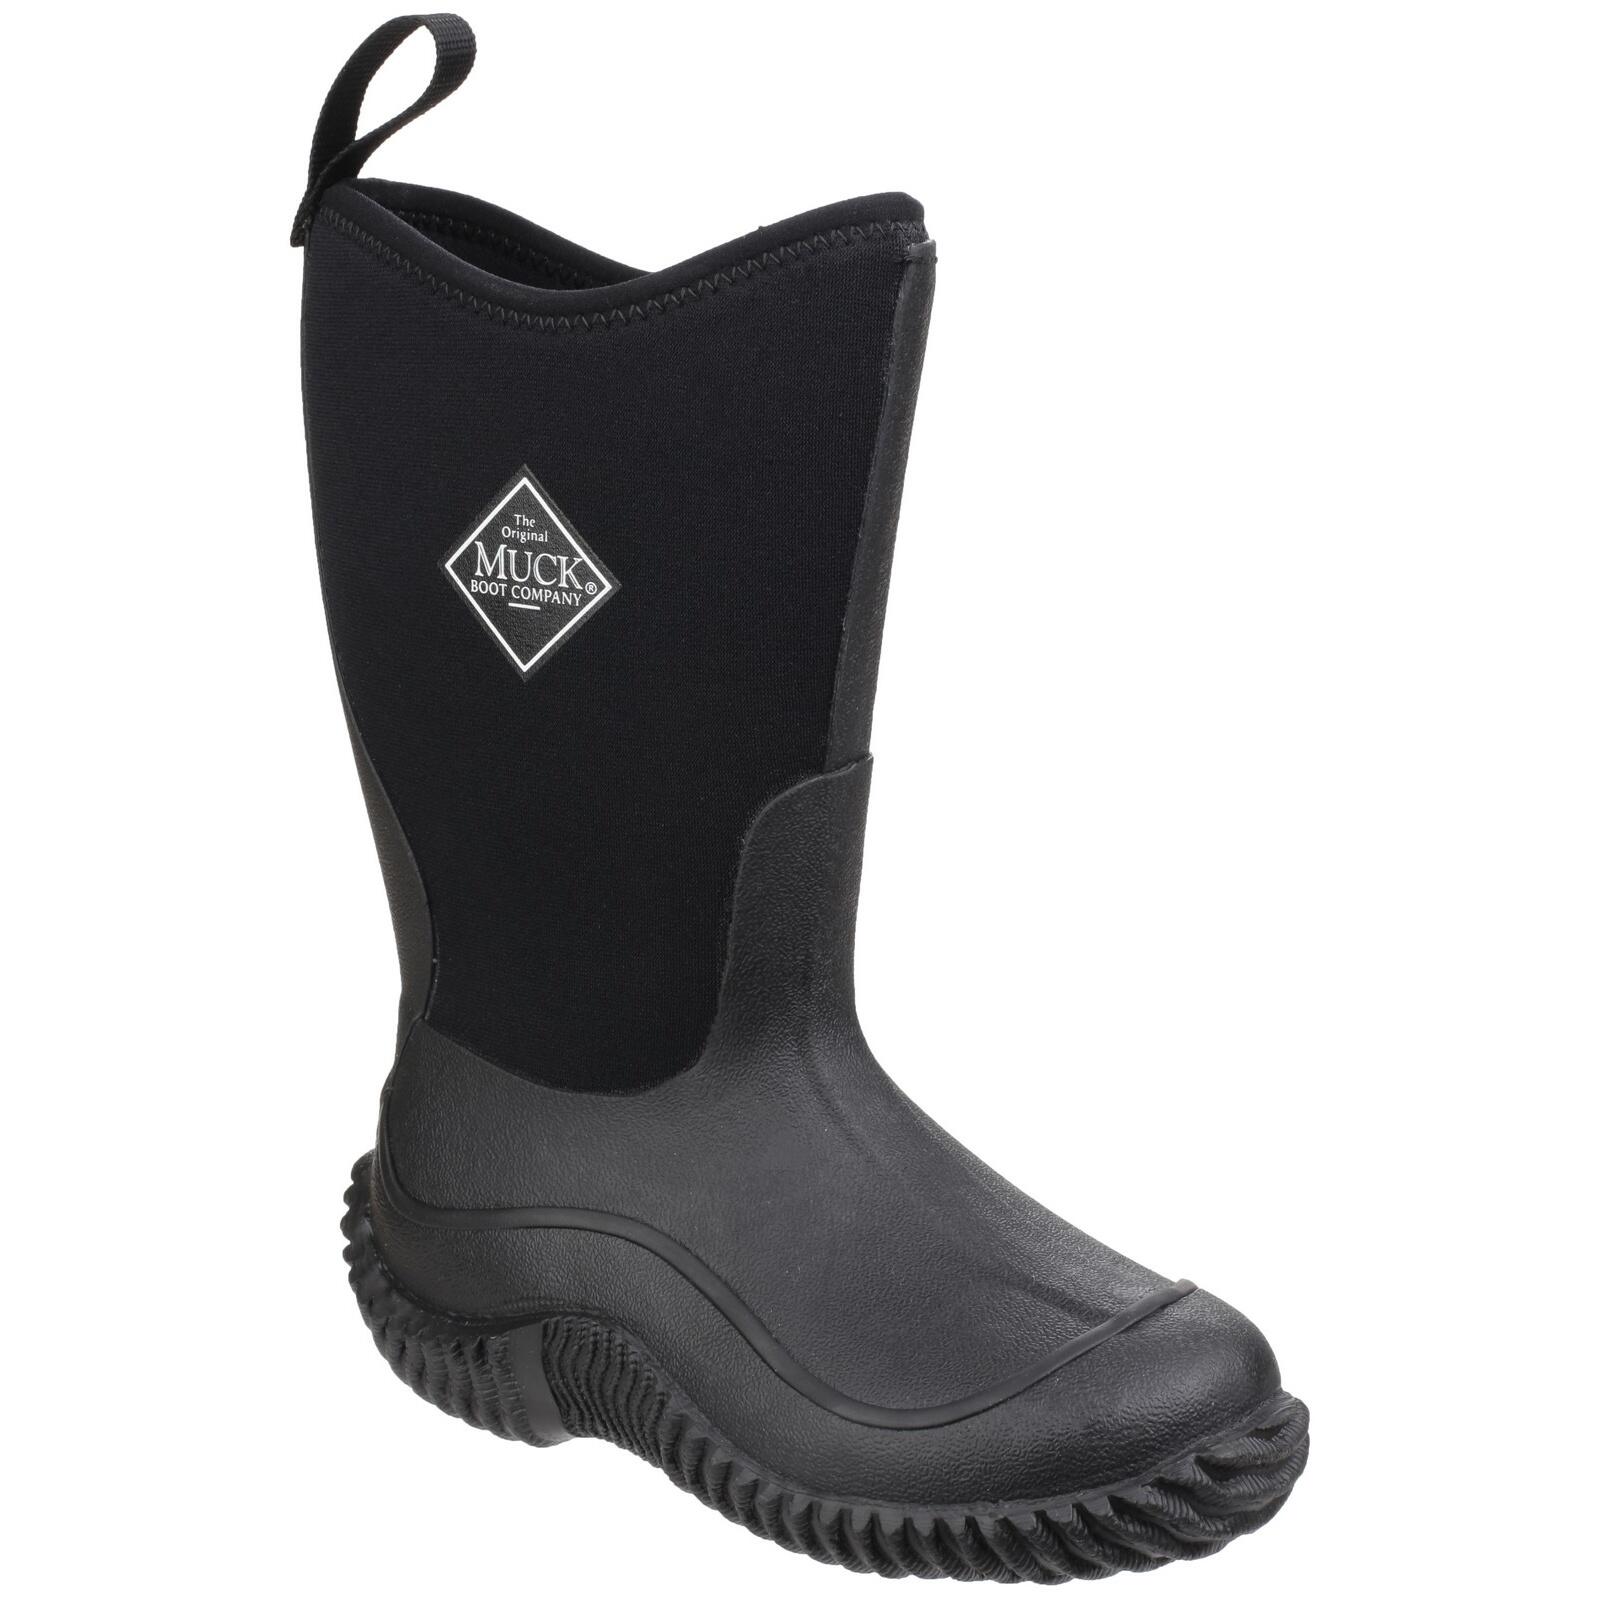 MUCK BOOTS Childrens/Kids Hale Pull On Wellington Boots (Black)